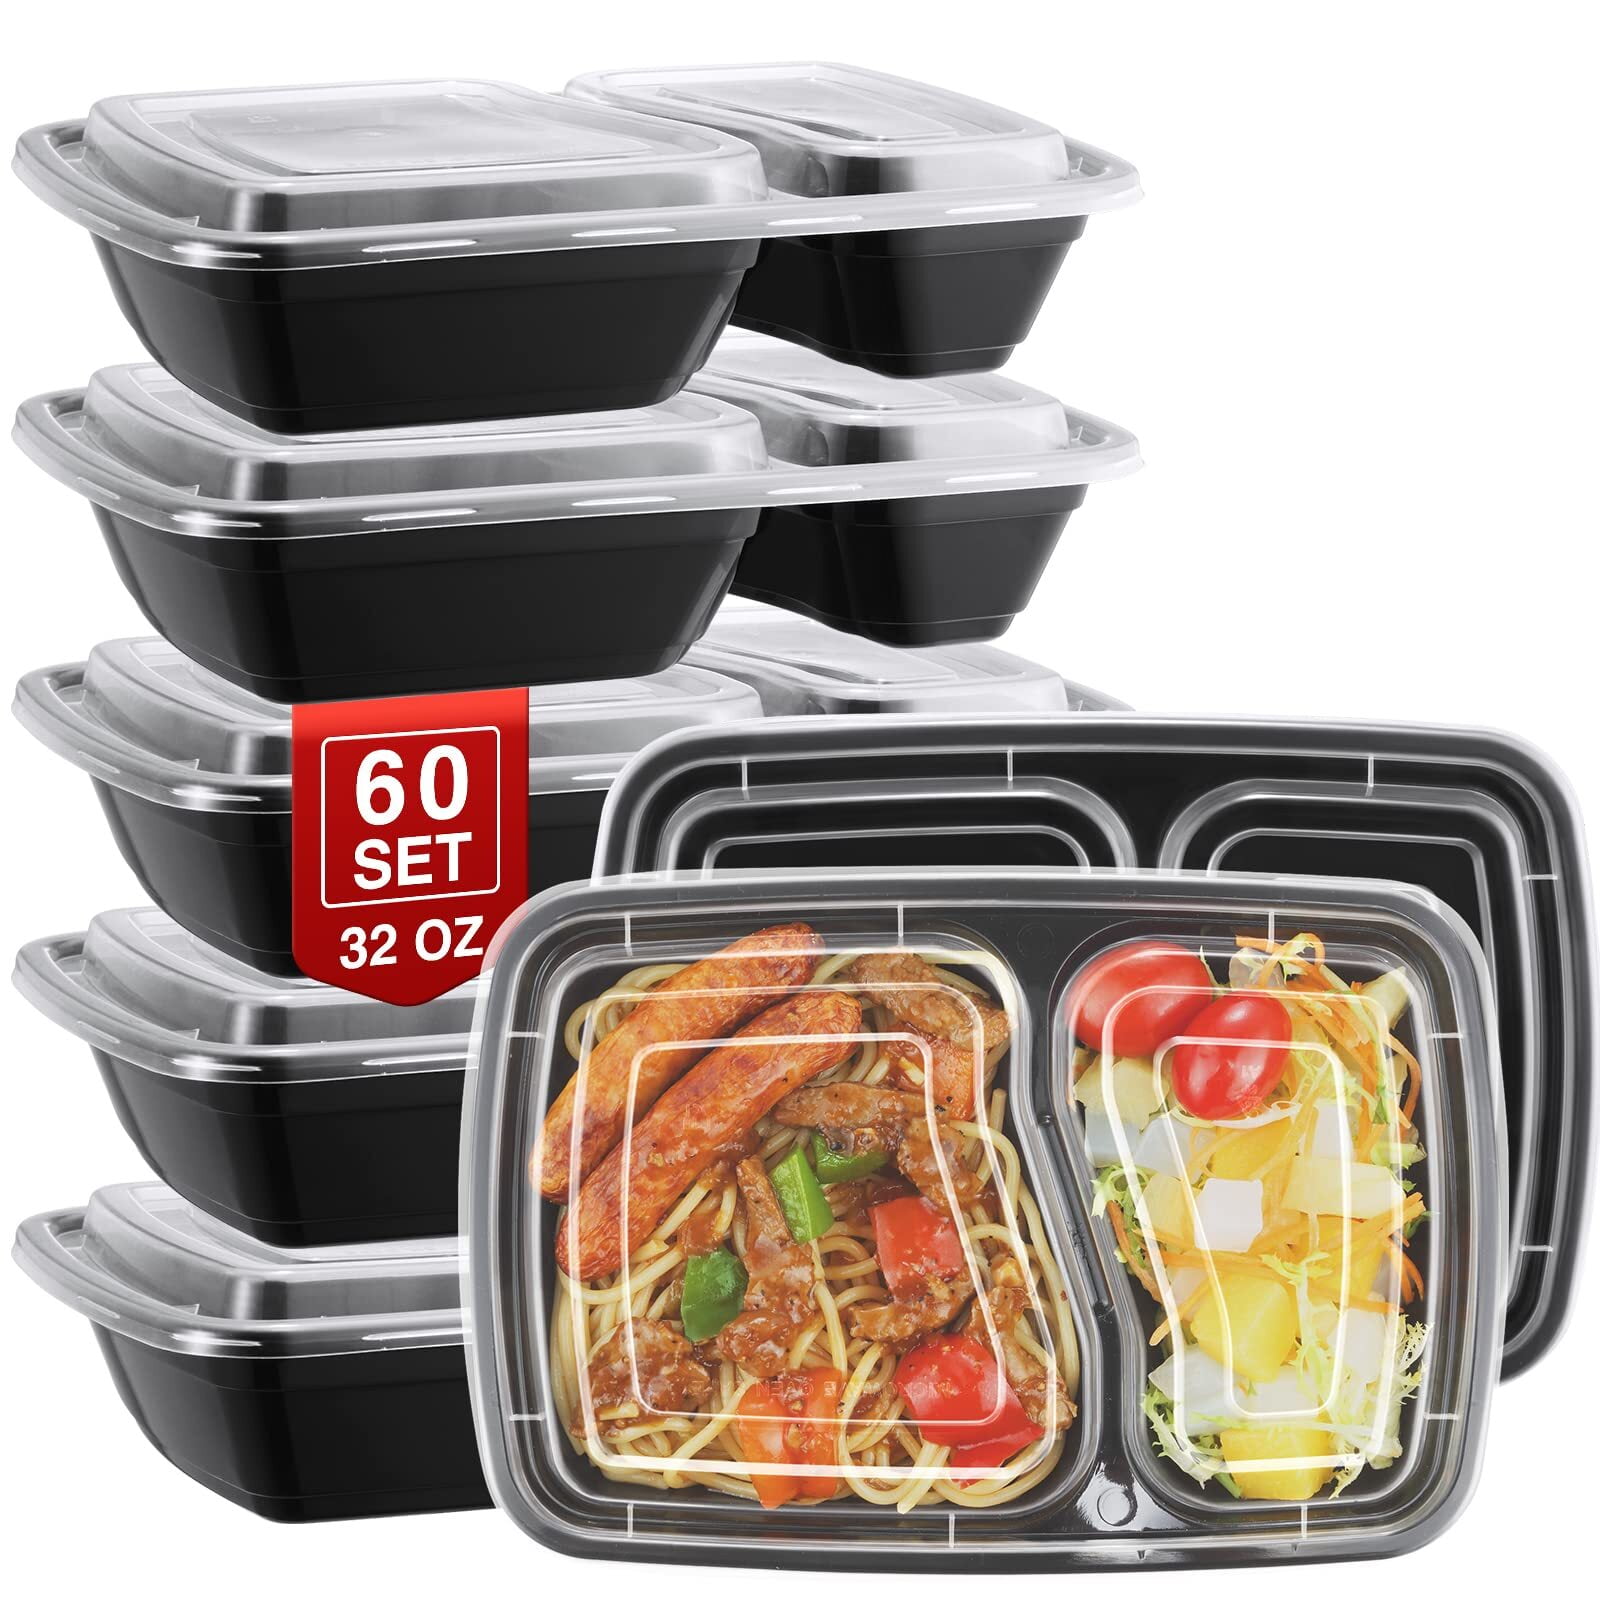 15 Pack- Meal Prep Containers 32oz, Plastic Food Prep Containers with Lids,  Leakproof To Go Containers with Lids Reusable Food Containers, BPA-Free